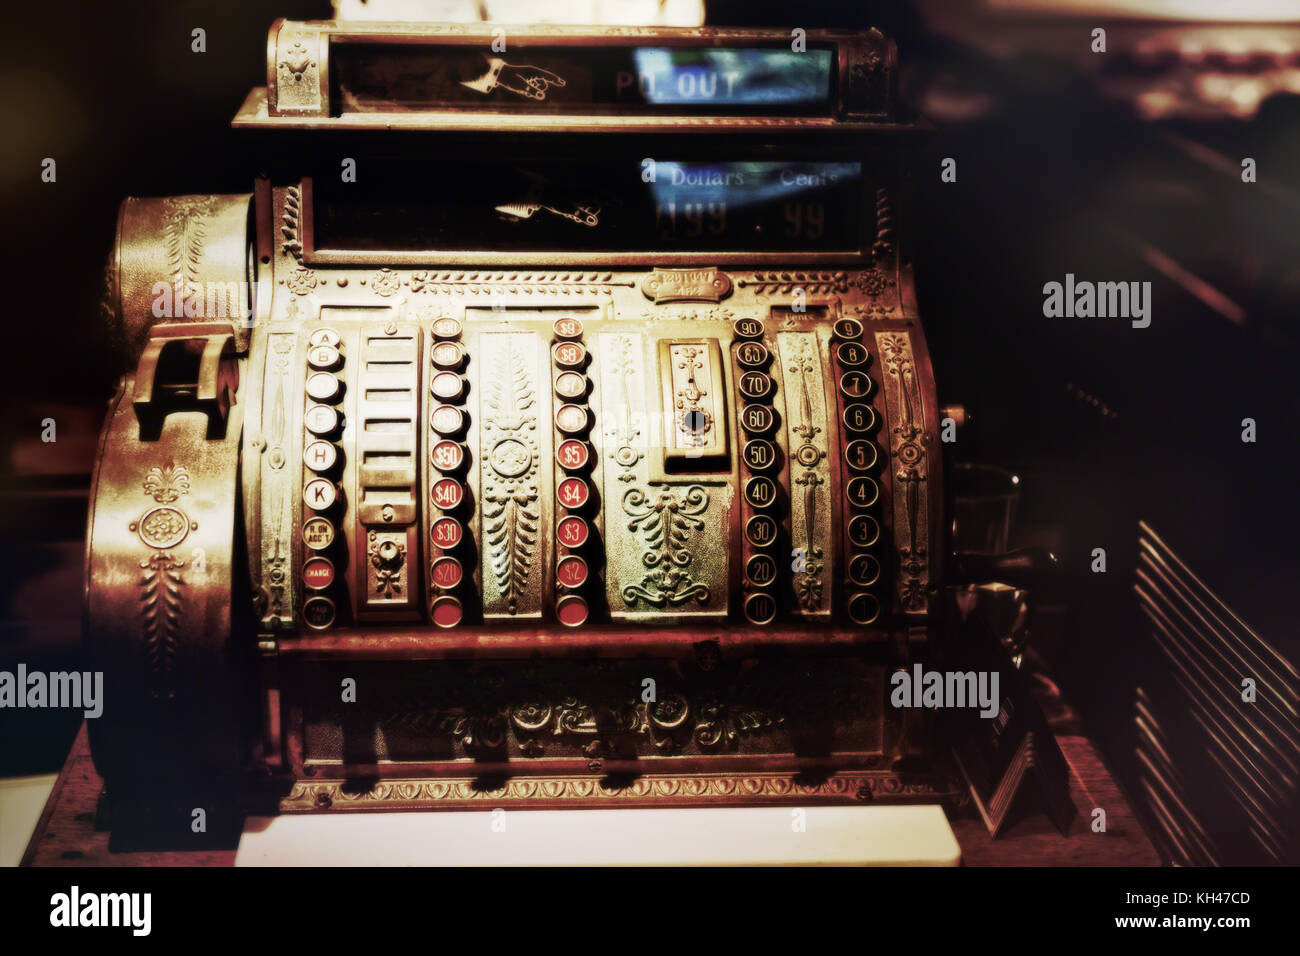 Close Up View of and Old Cash Register Stock Photo